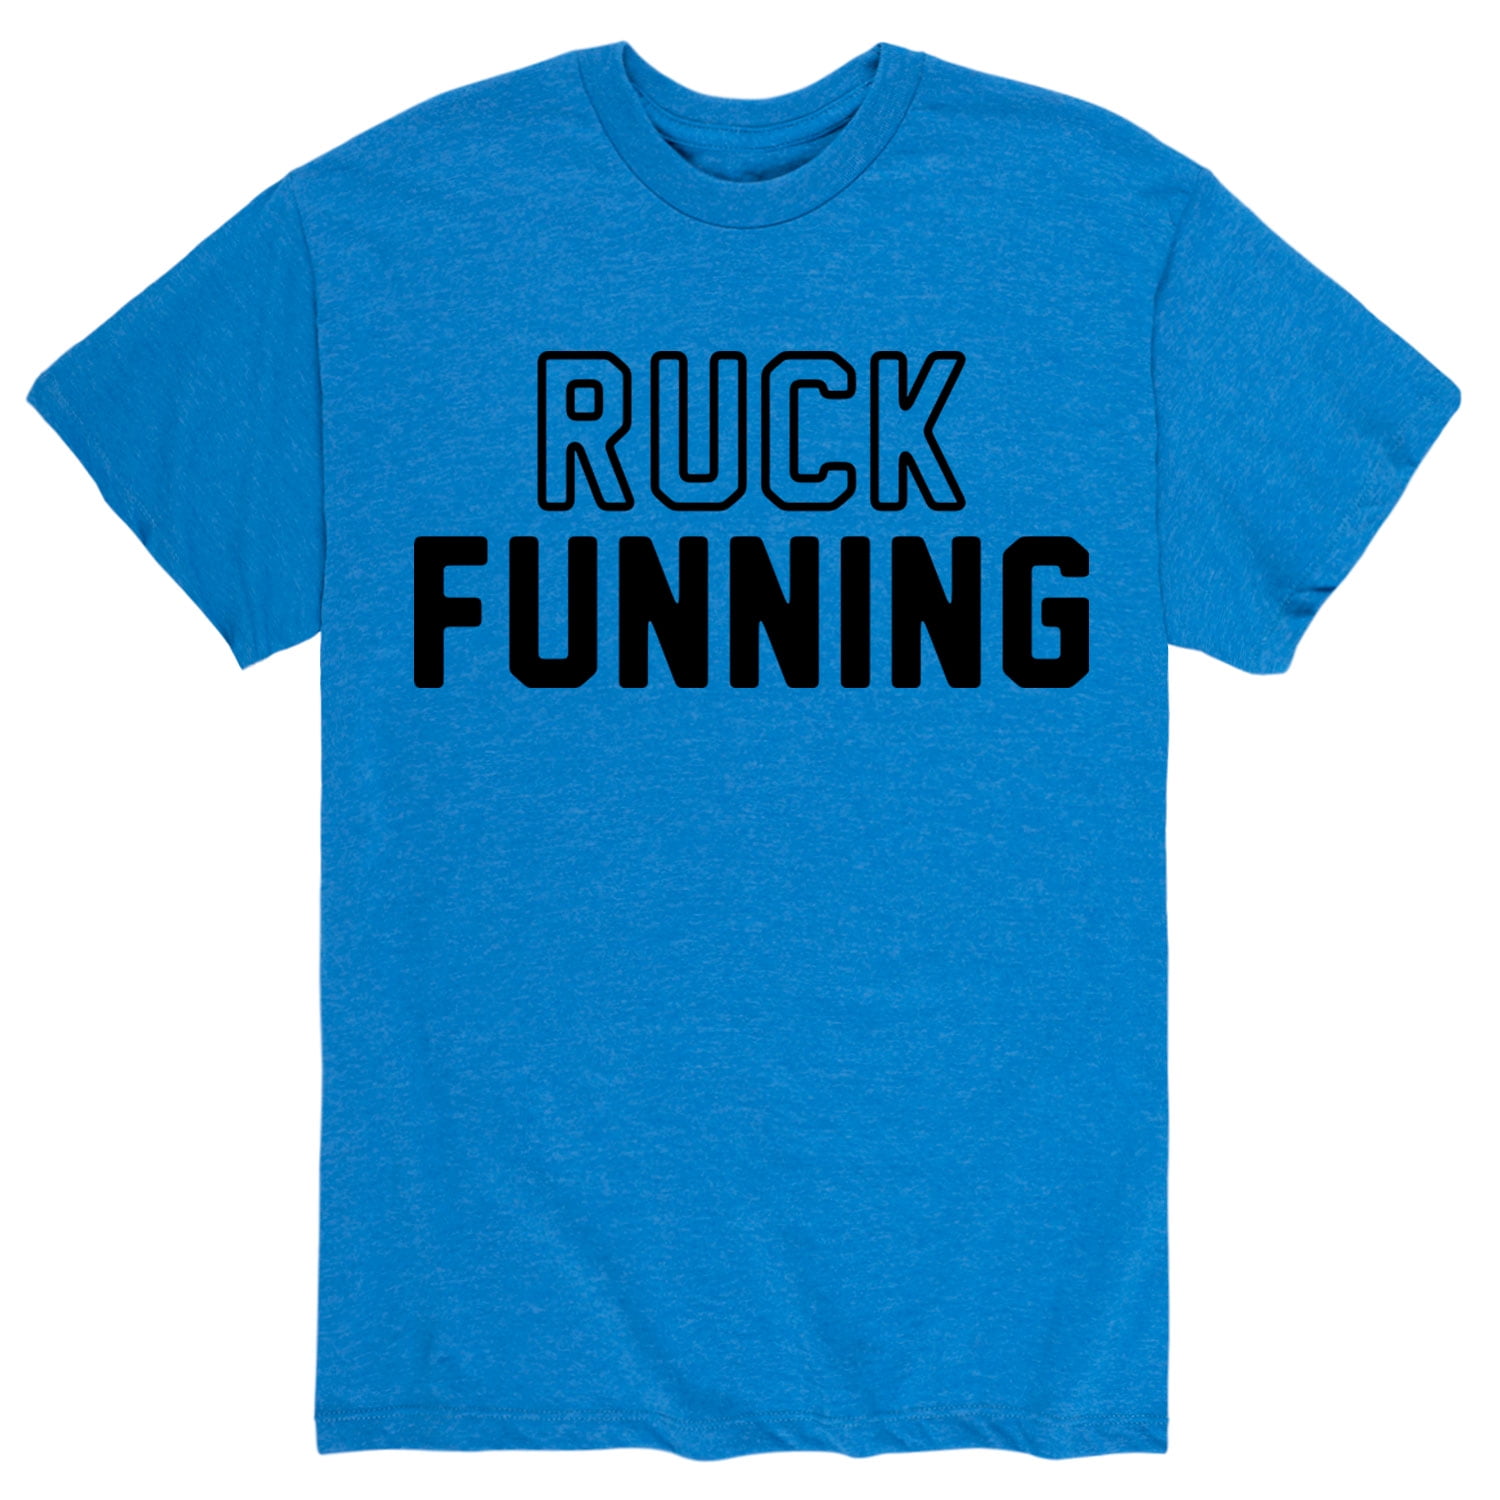 Instant Message - Ruck Funning - Funny Fitness Adult Short Sleeve Tee ...